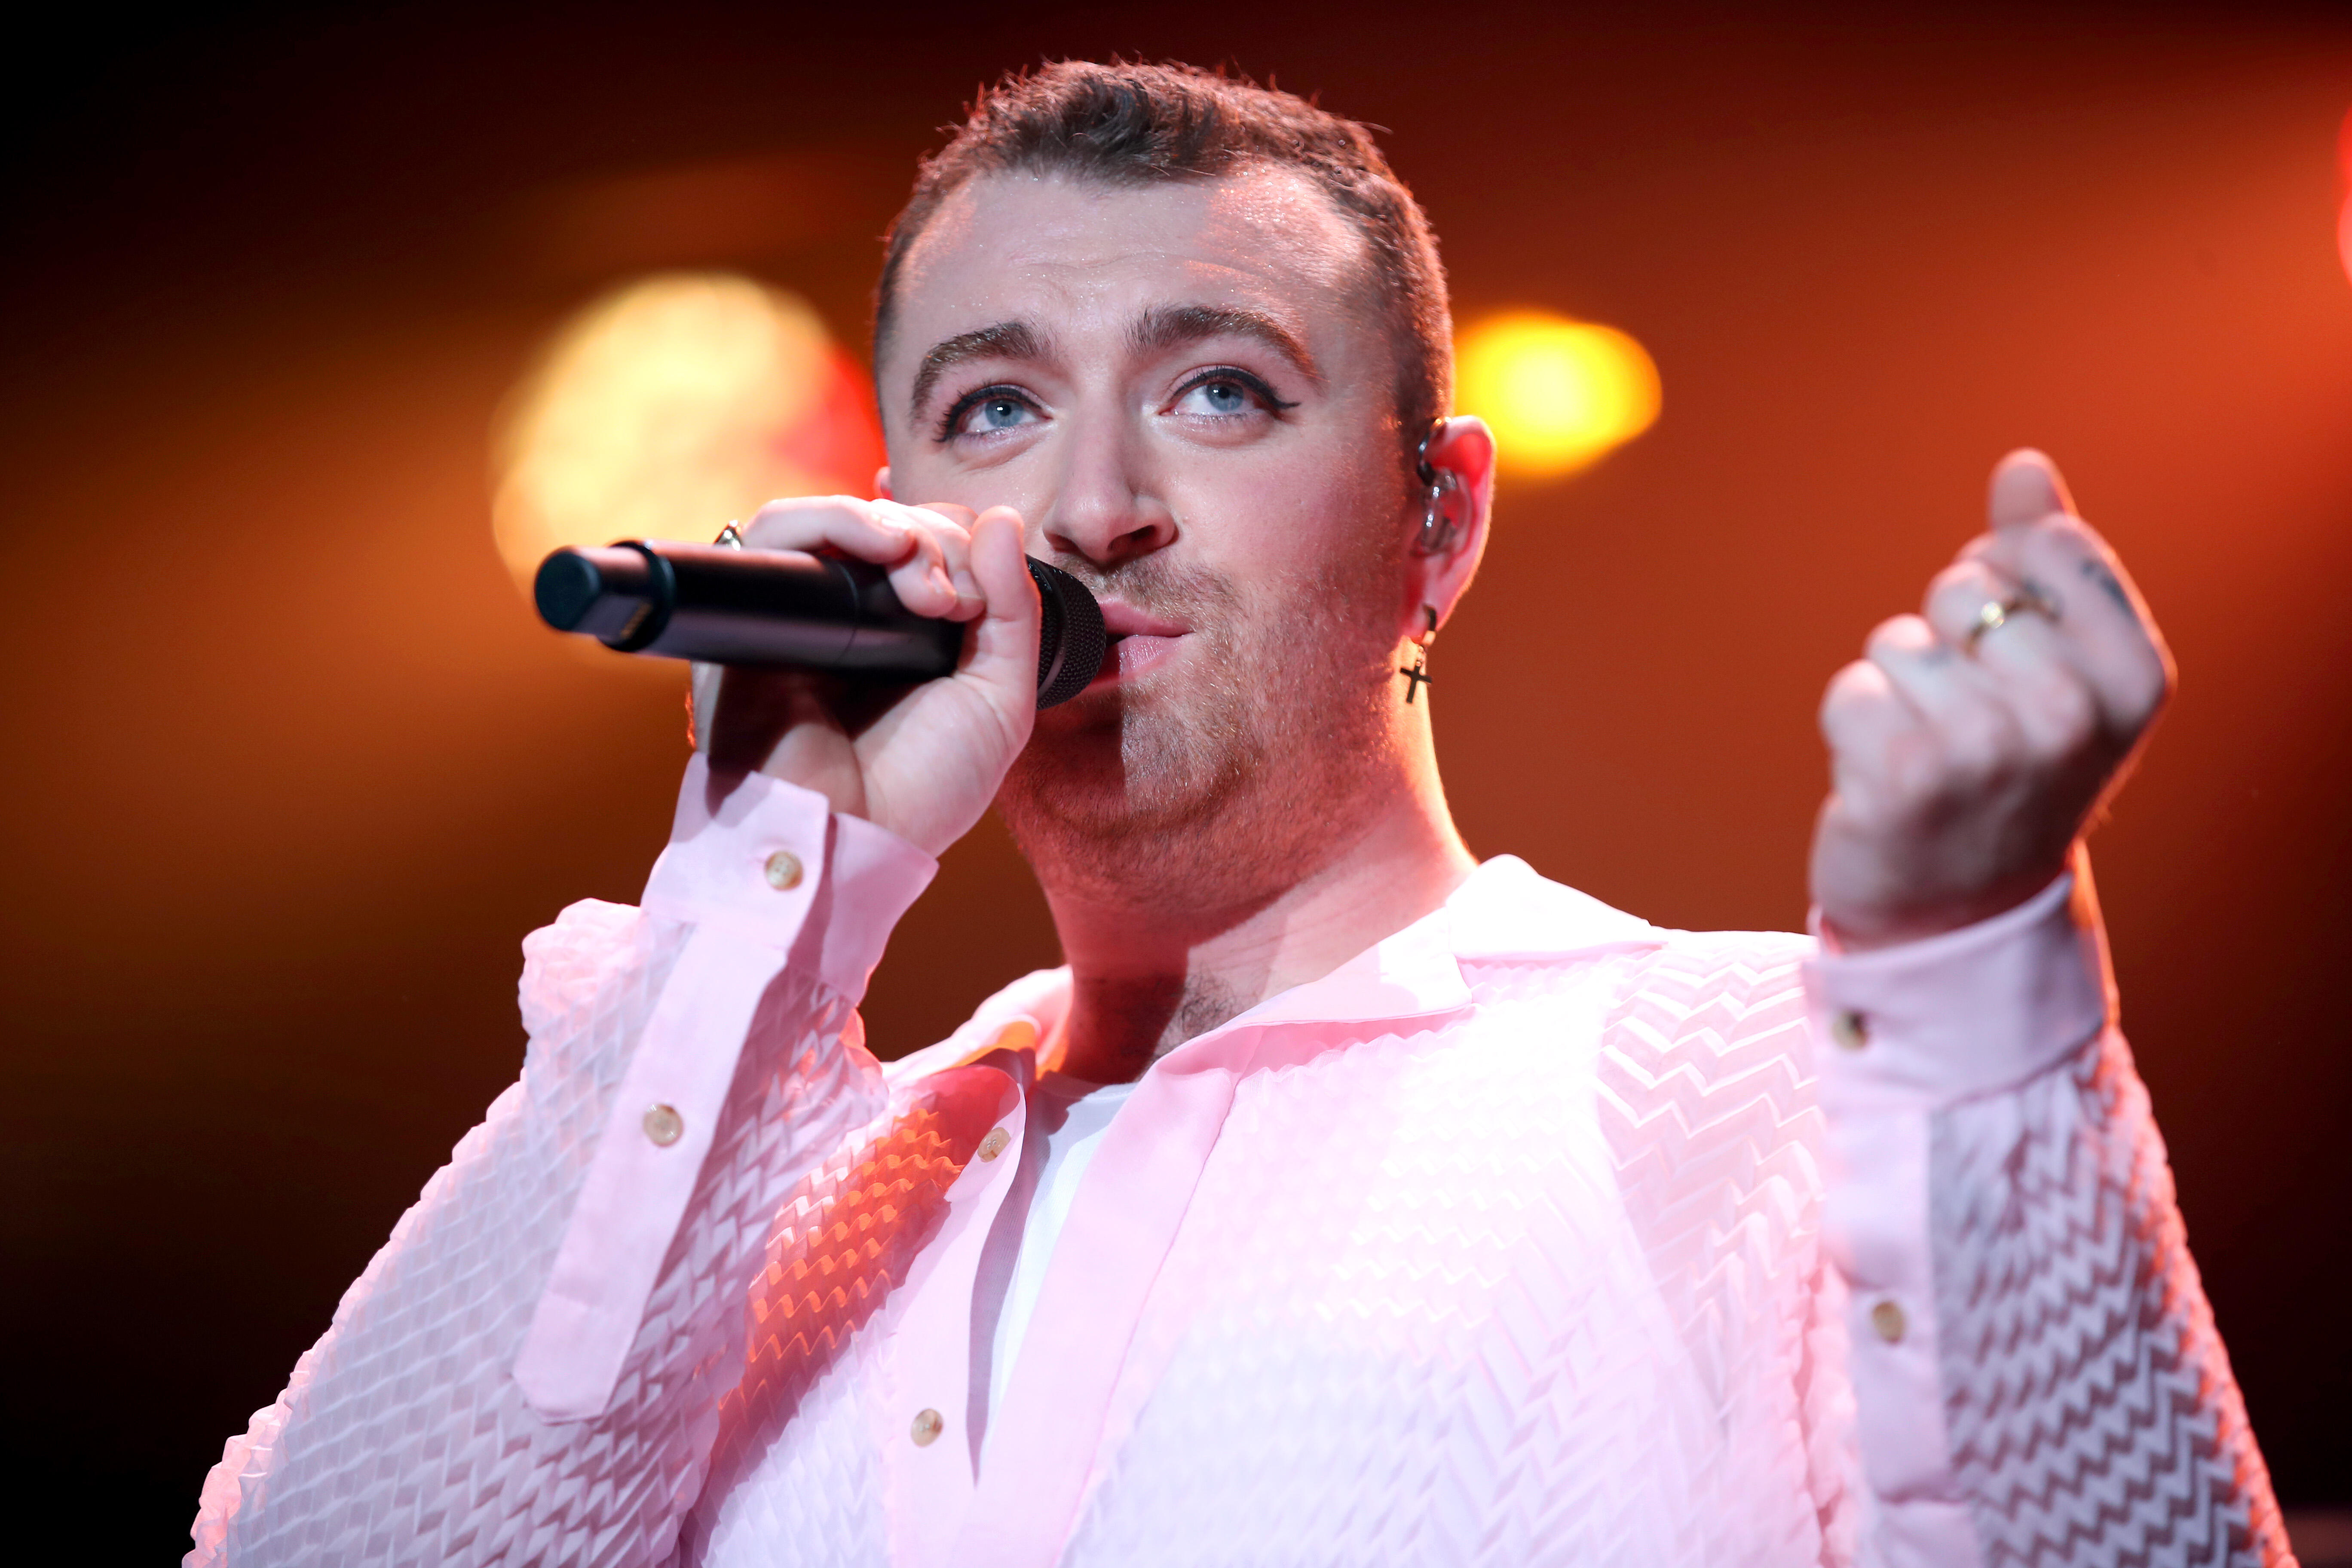 Sam Smith Releases His New Music Video "Pray" - Thumbnail Image